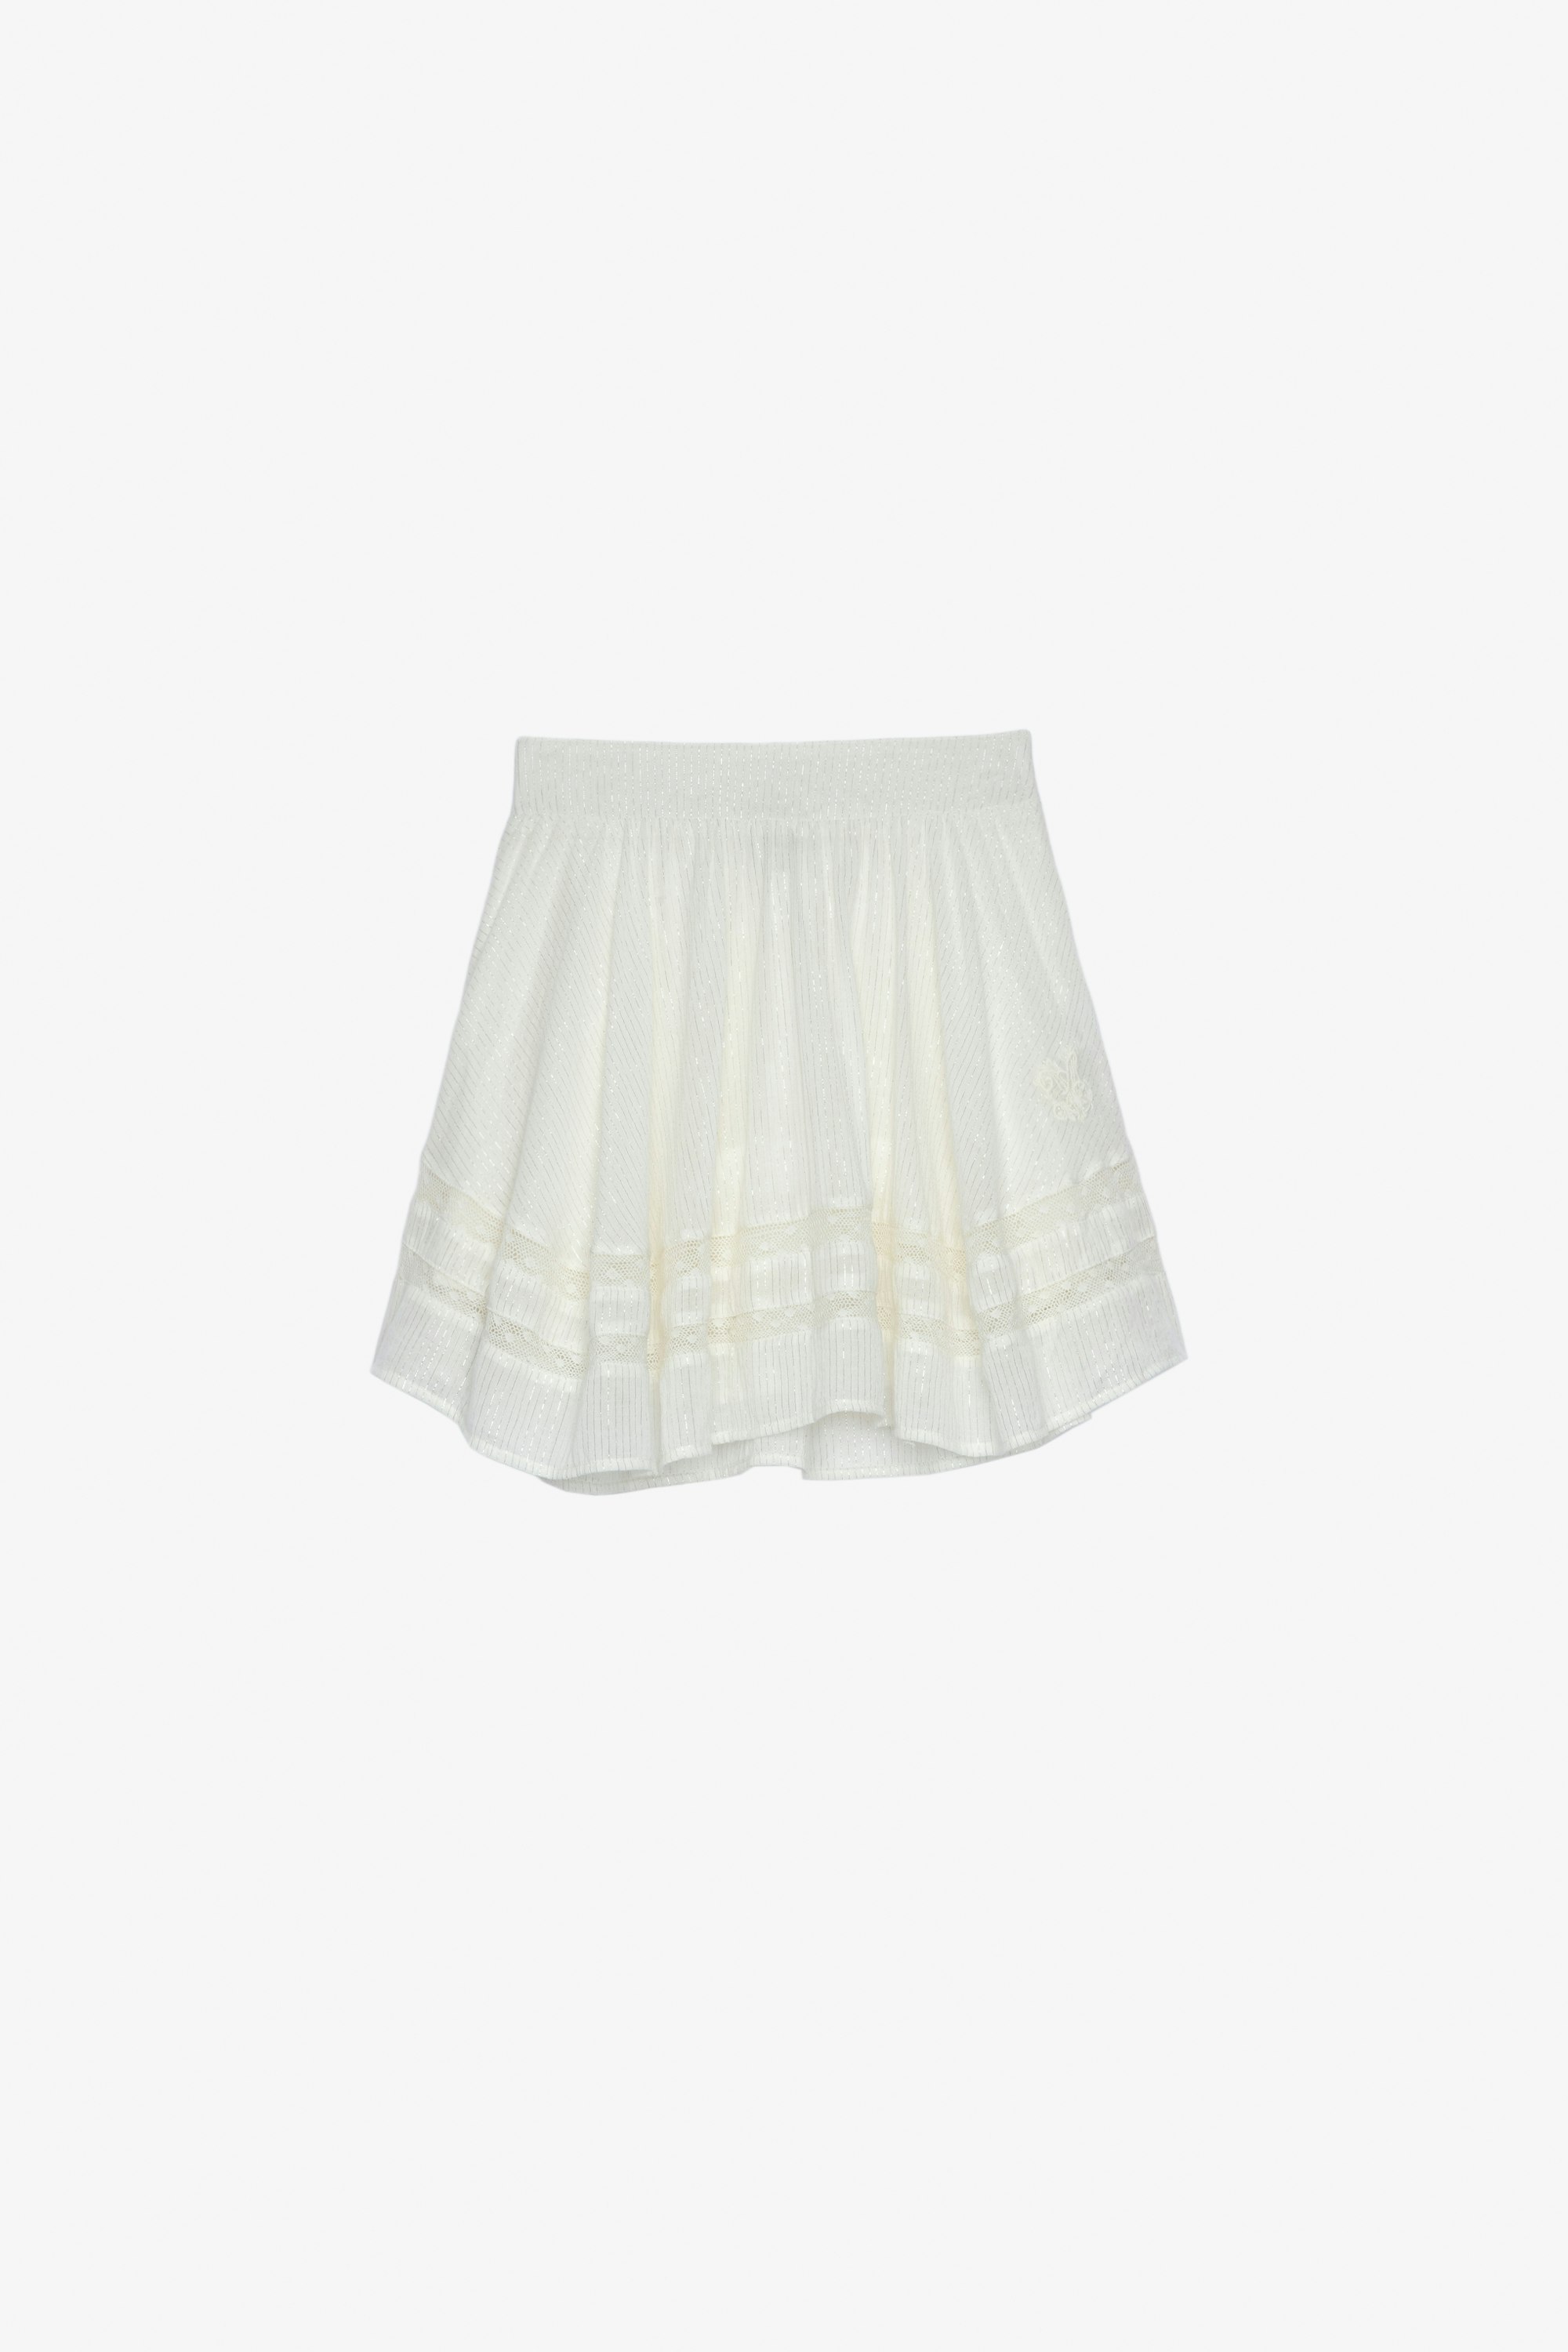 Sophie Kids' Skirt Kids’ short pleated skirt with lace trim